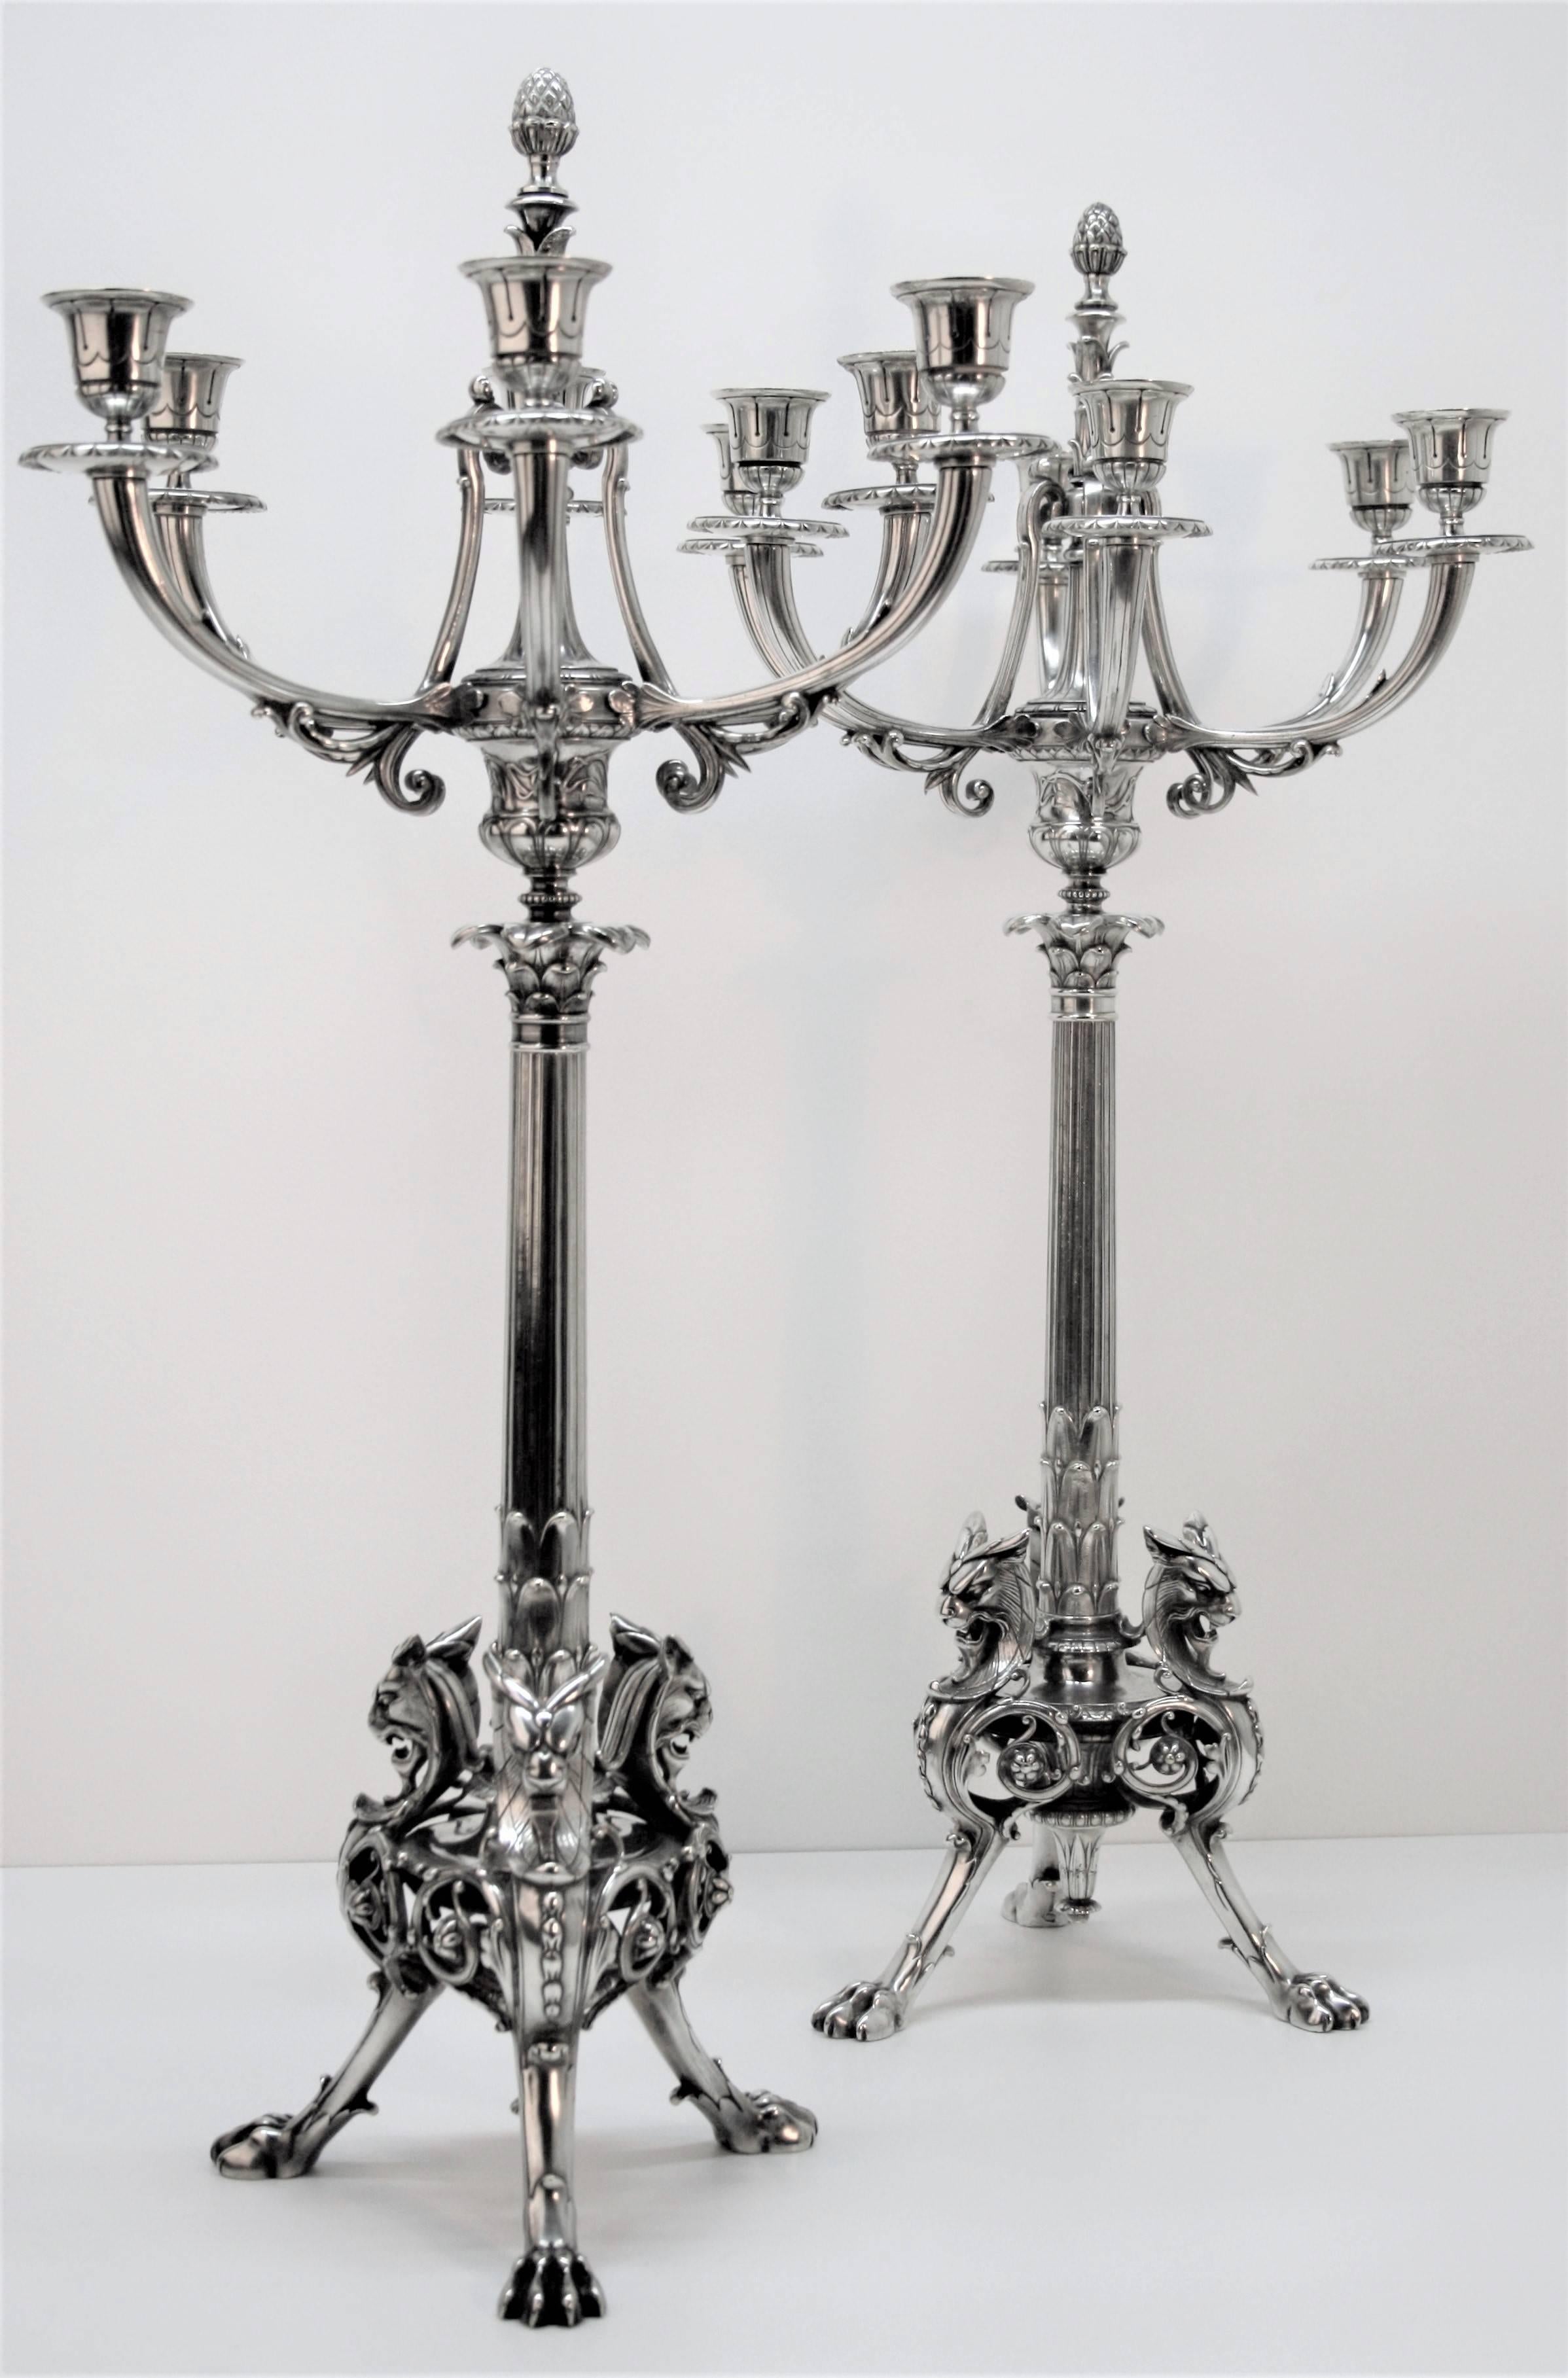 An exceptional and impressive pair of candelabra from the Parisian goldsmith Christofle. Finely chiseled and executed by Charles Christofle in the late 19th century, mounted on 3 feet of Griffins, fluted shaft adorned with acanthus leaves, Medicis